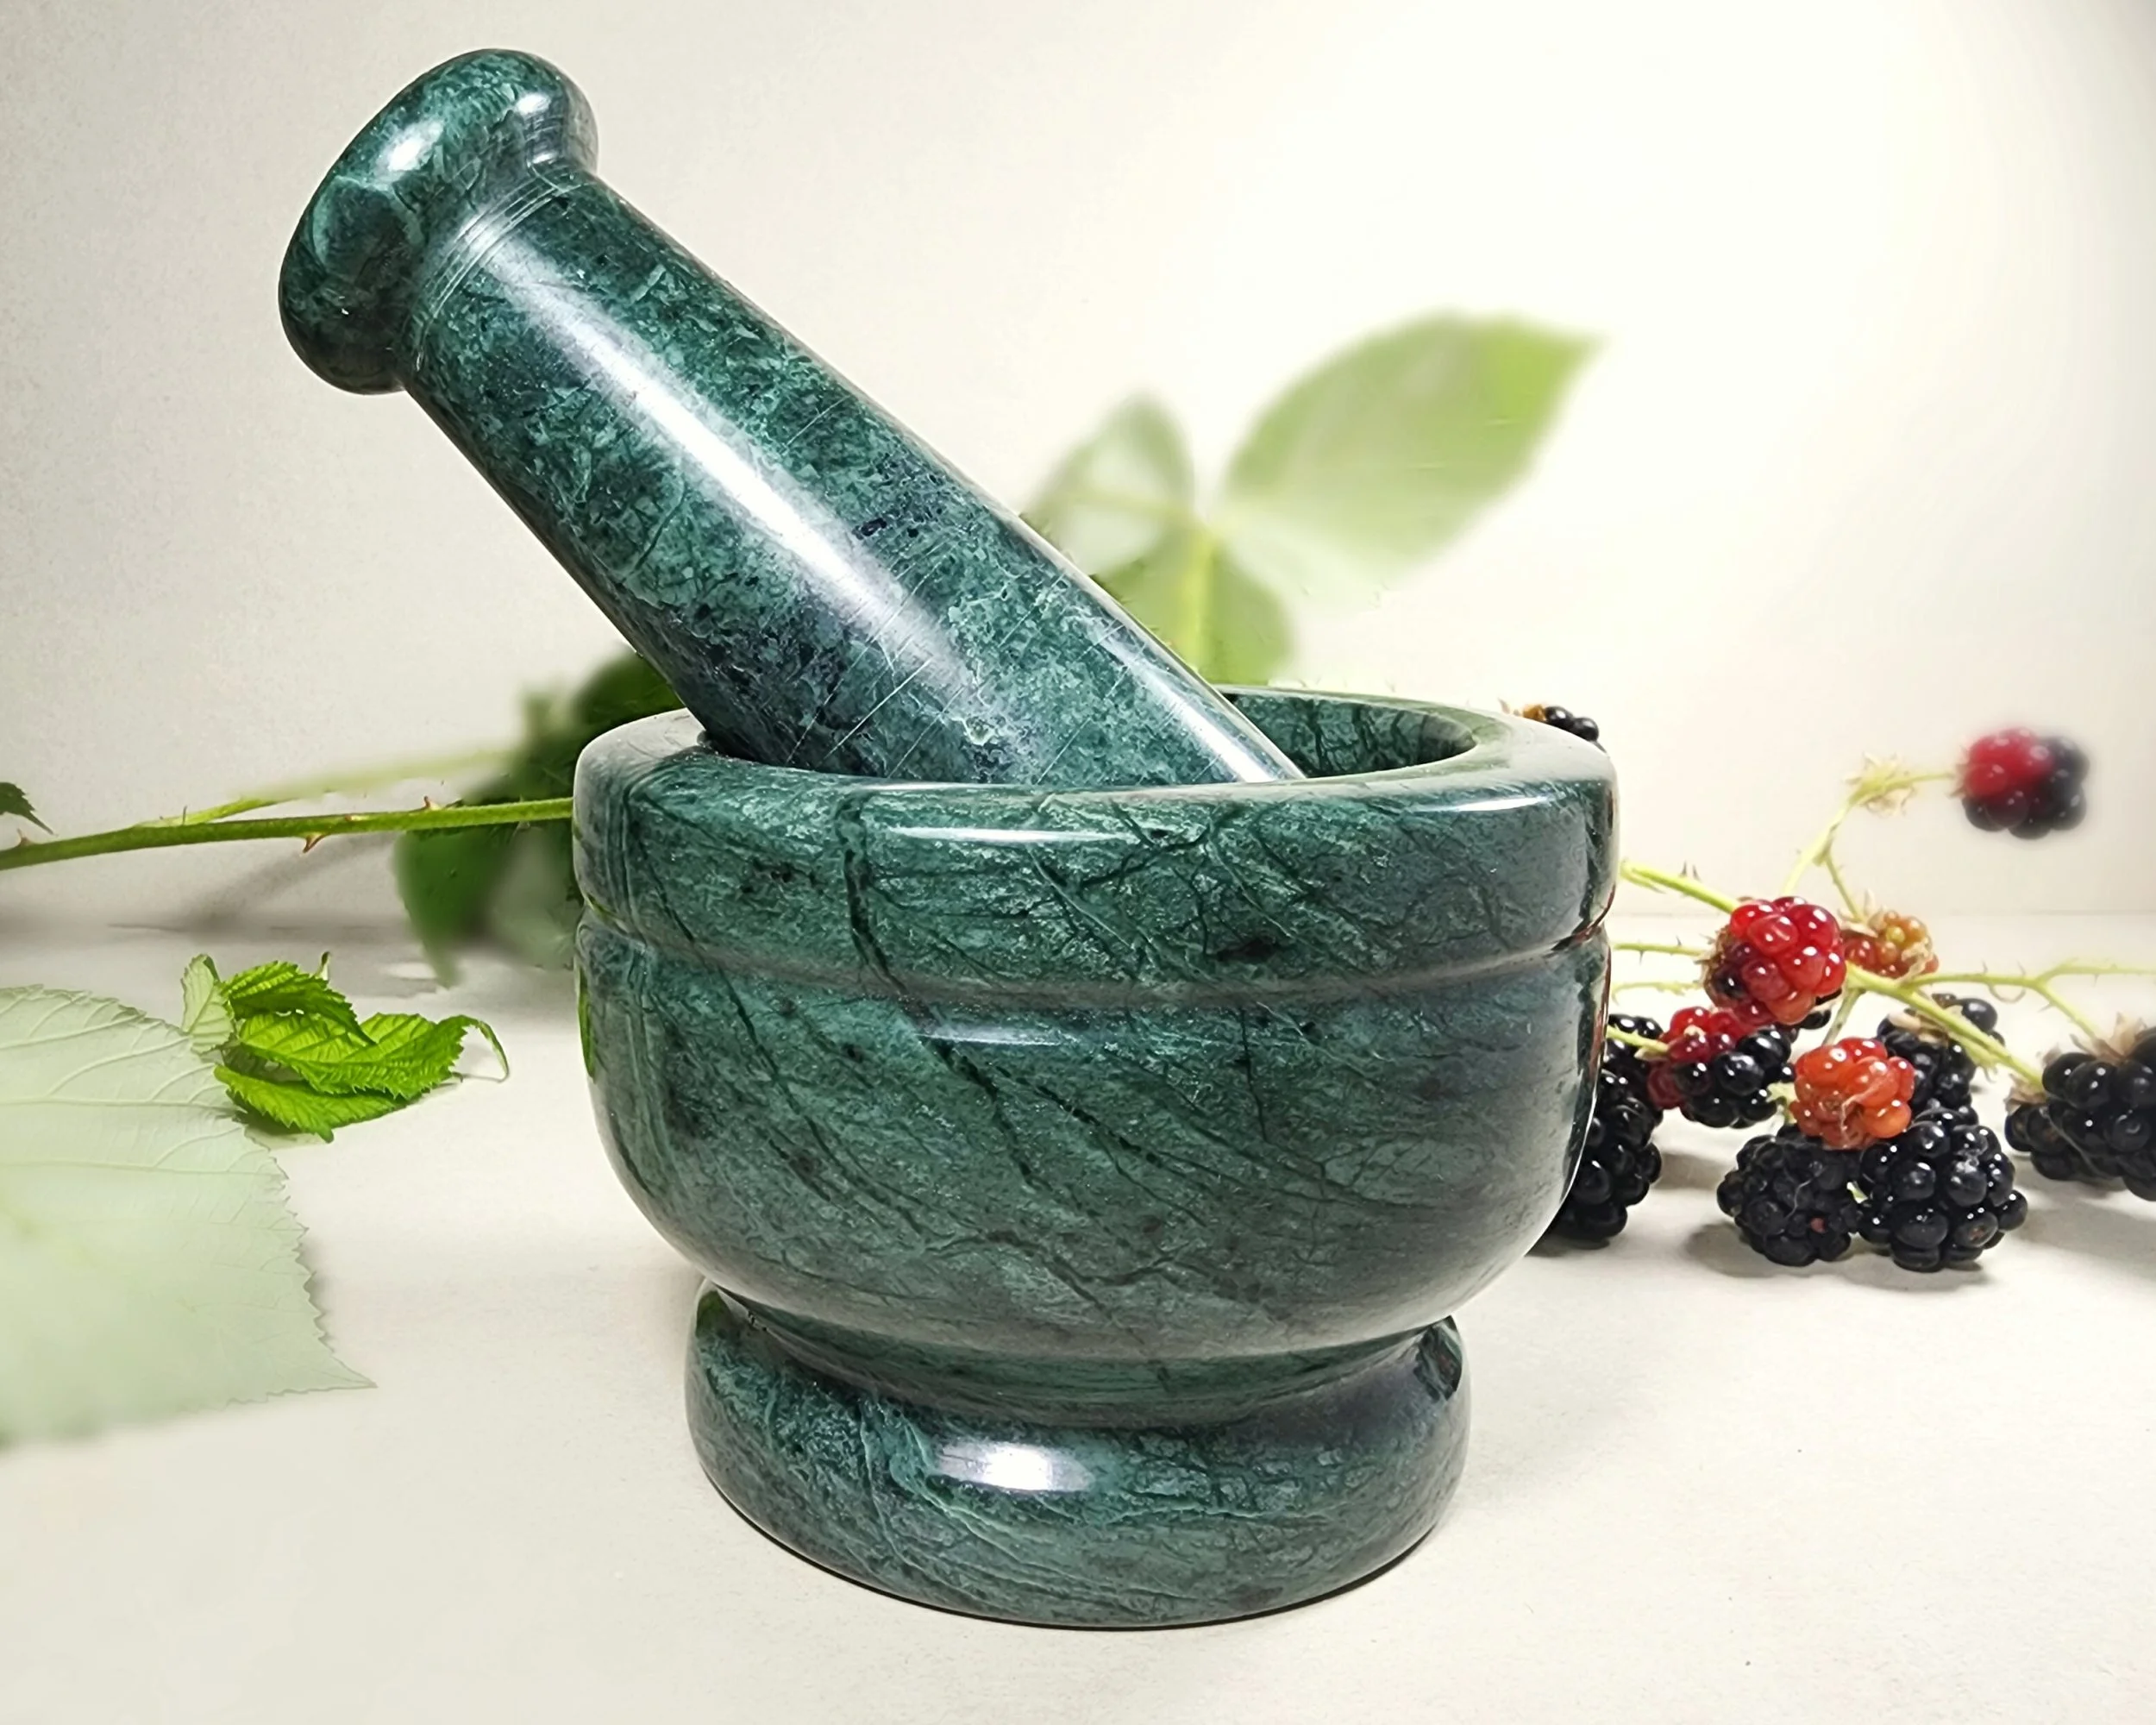 https://odditiesforsale.com/wp-content/uploads/2022/08/Green-Marble-Mortar-Pestle-Witch-Supplies-1-scaled-scaled.jpg.webp